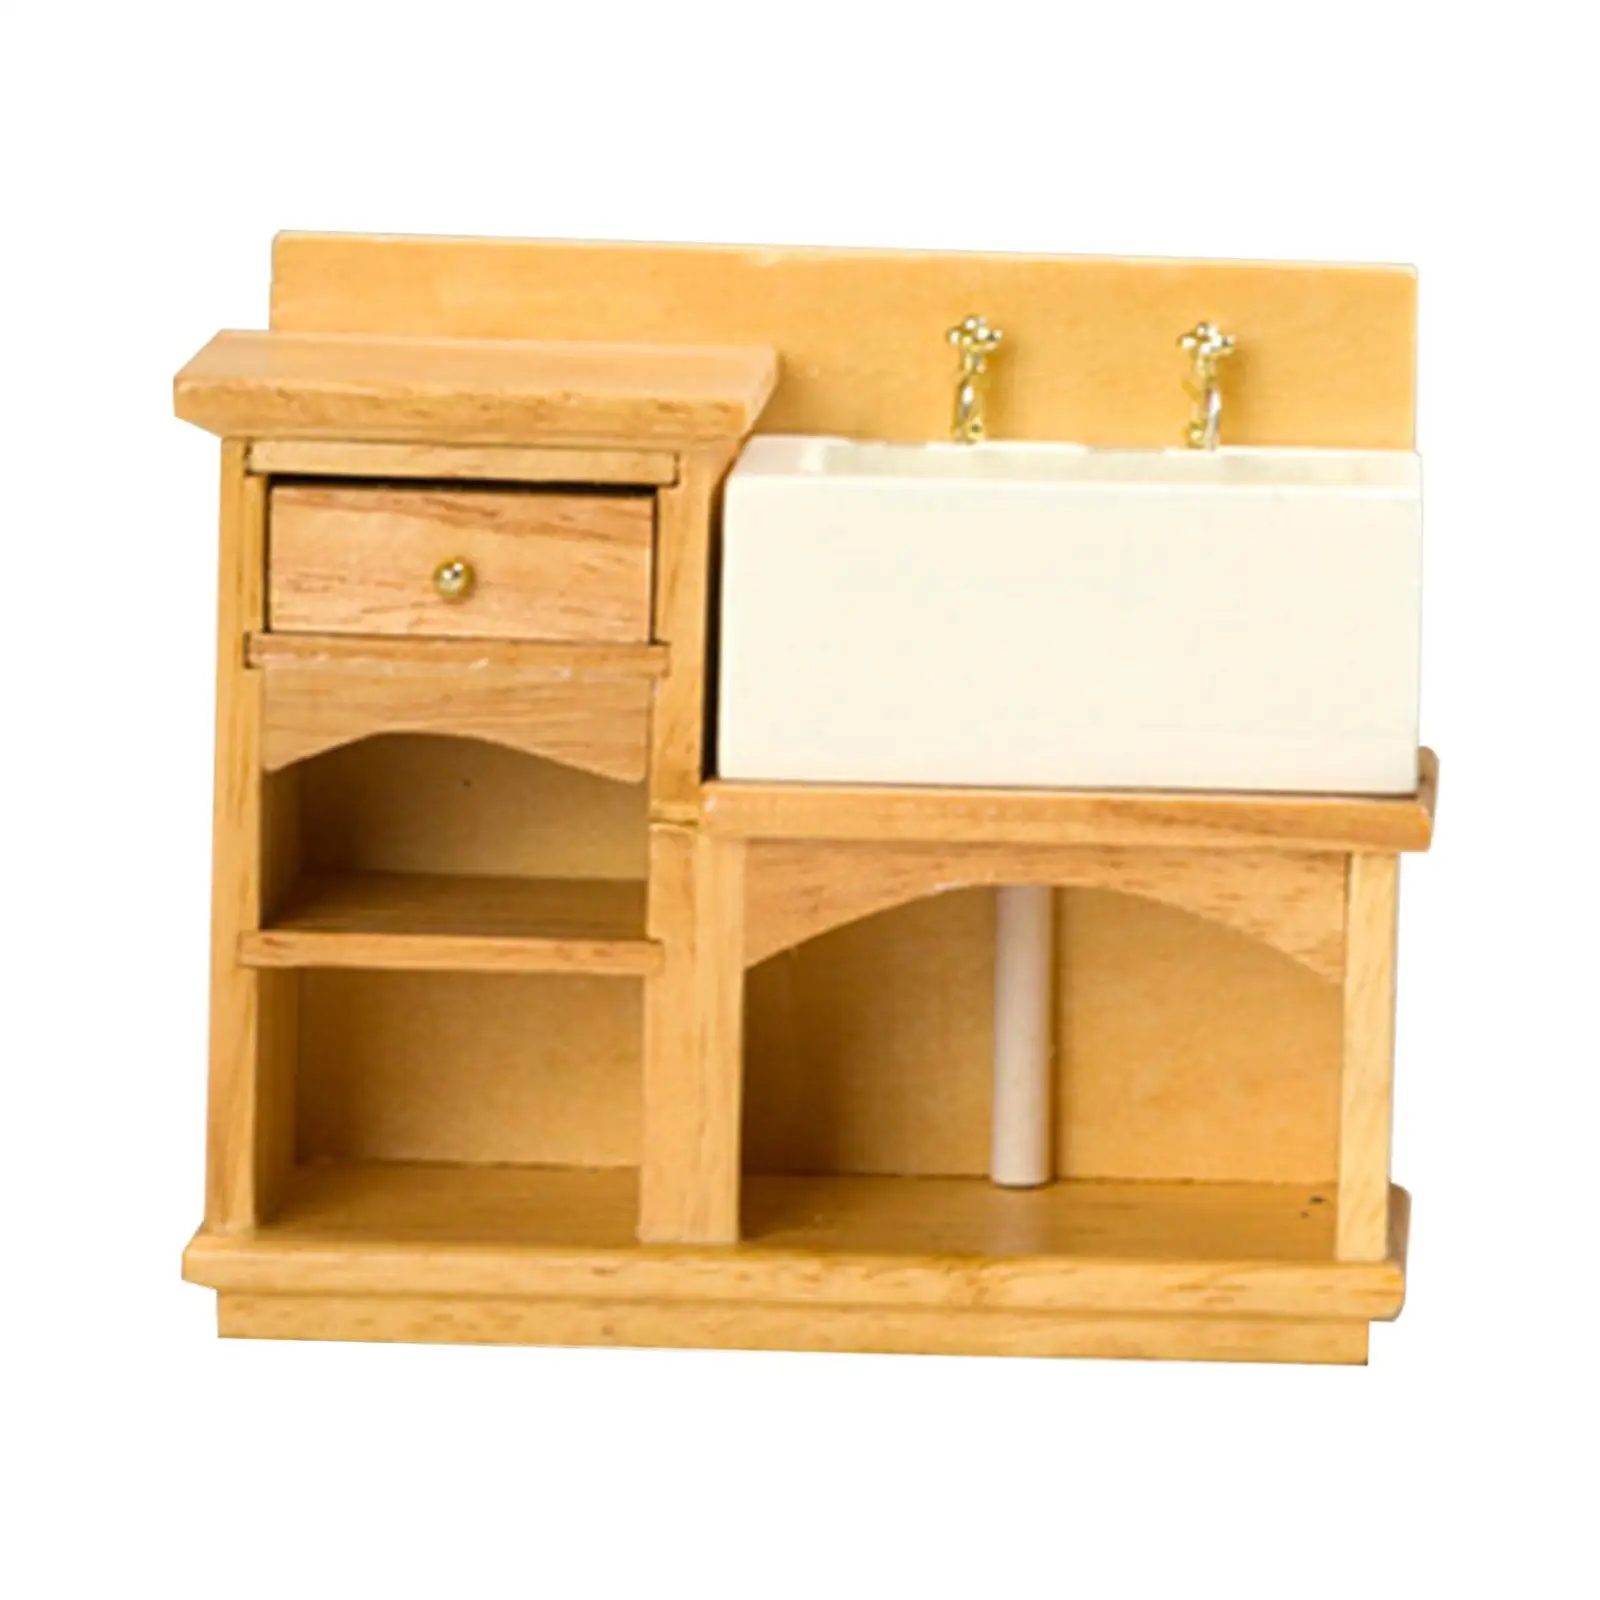 1:12 Wash Cabinet Mode,1/12 Dollhouse Wash Cabinet, 1:12 Miniature Cabinet Furniture for Kids Play House Toys